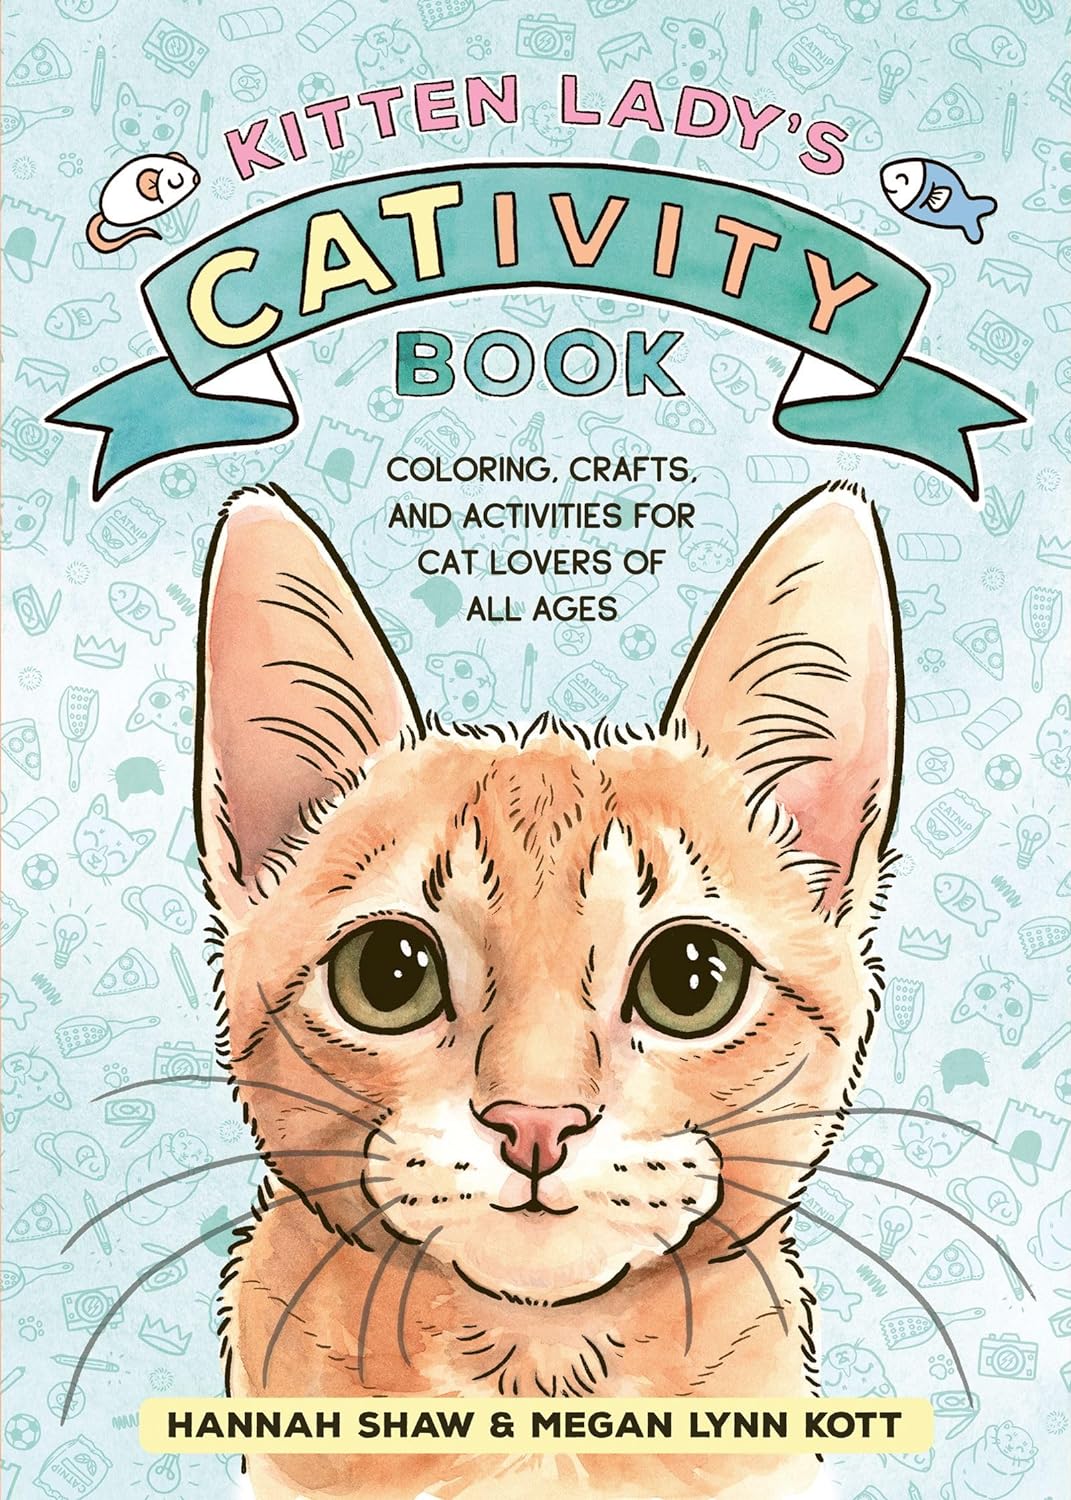 Kitten Lady's Cativity Book: Coloring, Crafts, and Activities for Cat Lovers of All Ages